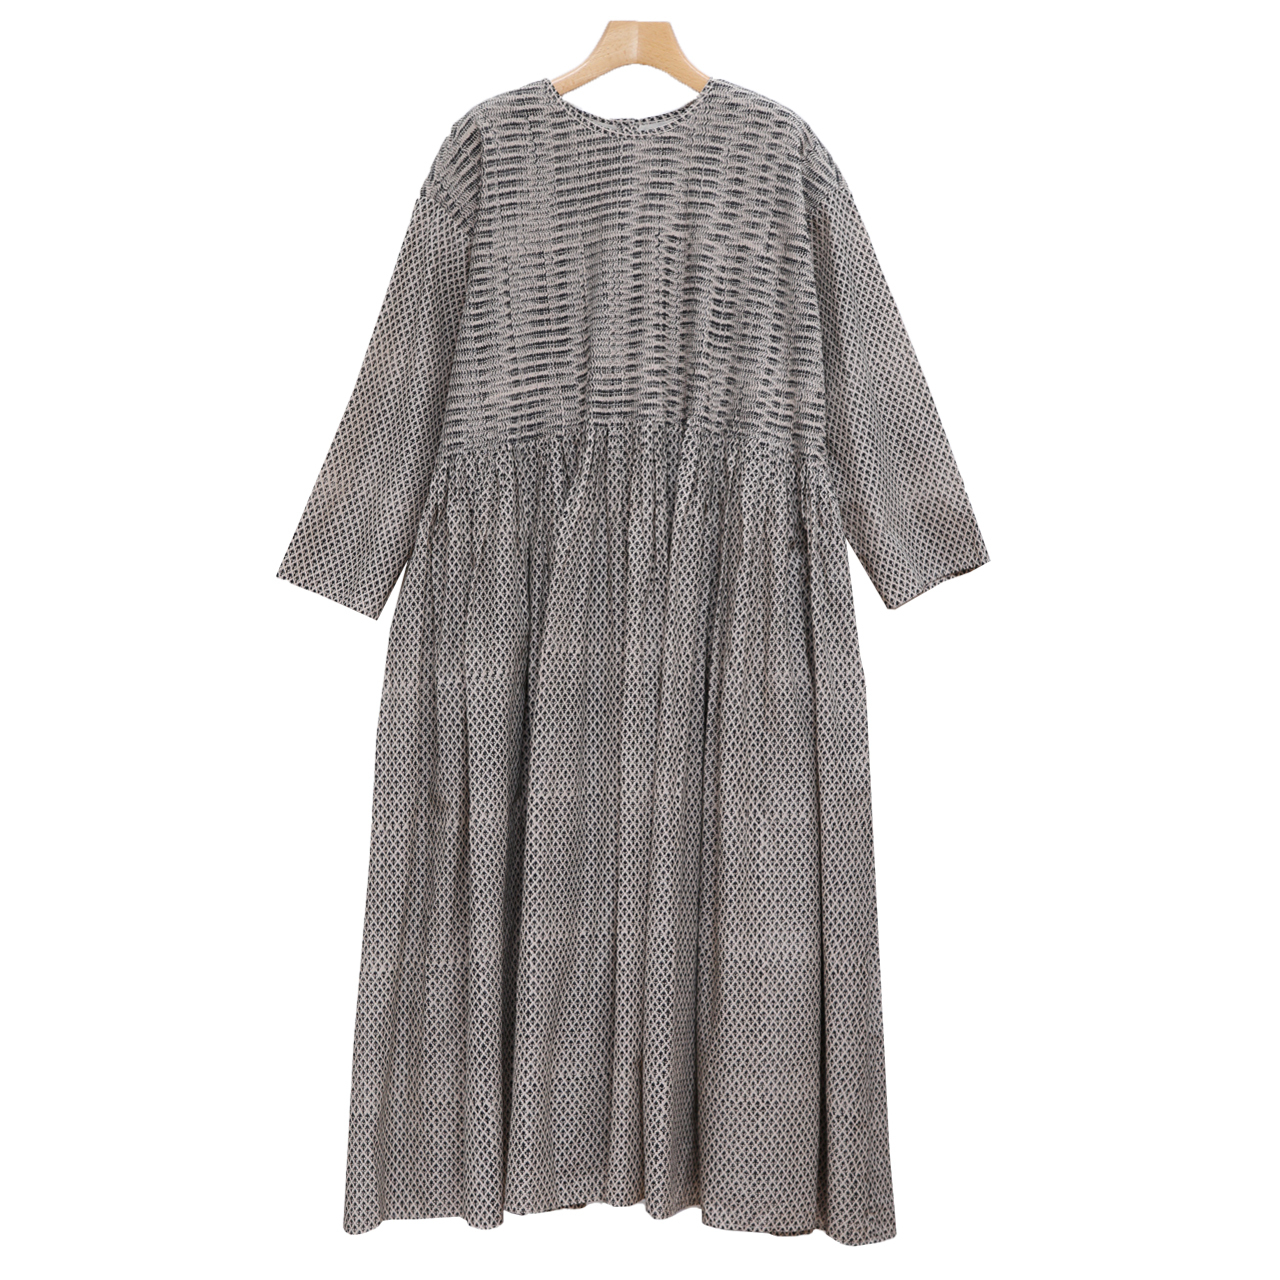 Maison De Soil メゾンドソイル 80 S Voile Small Flower Block Print Crew Neck Dress With Mini Pintuck小花柄ピンタックワンピース Inmds162 Provice